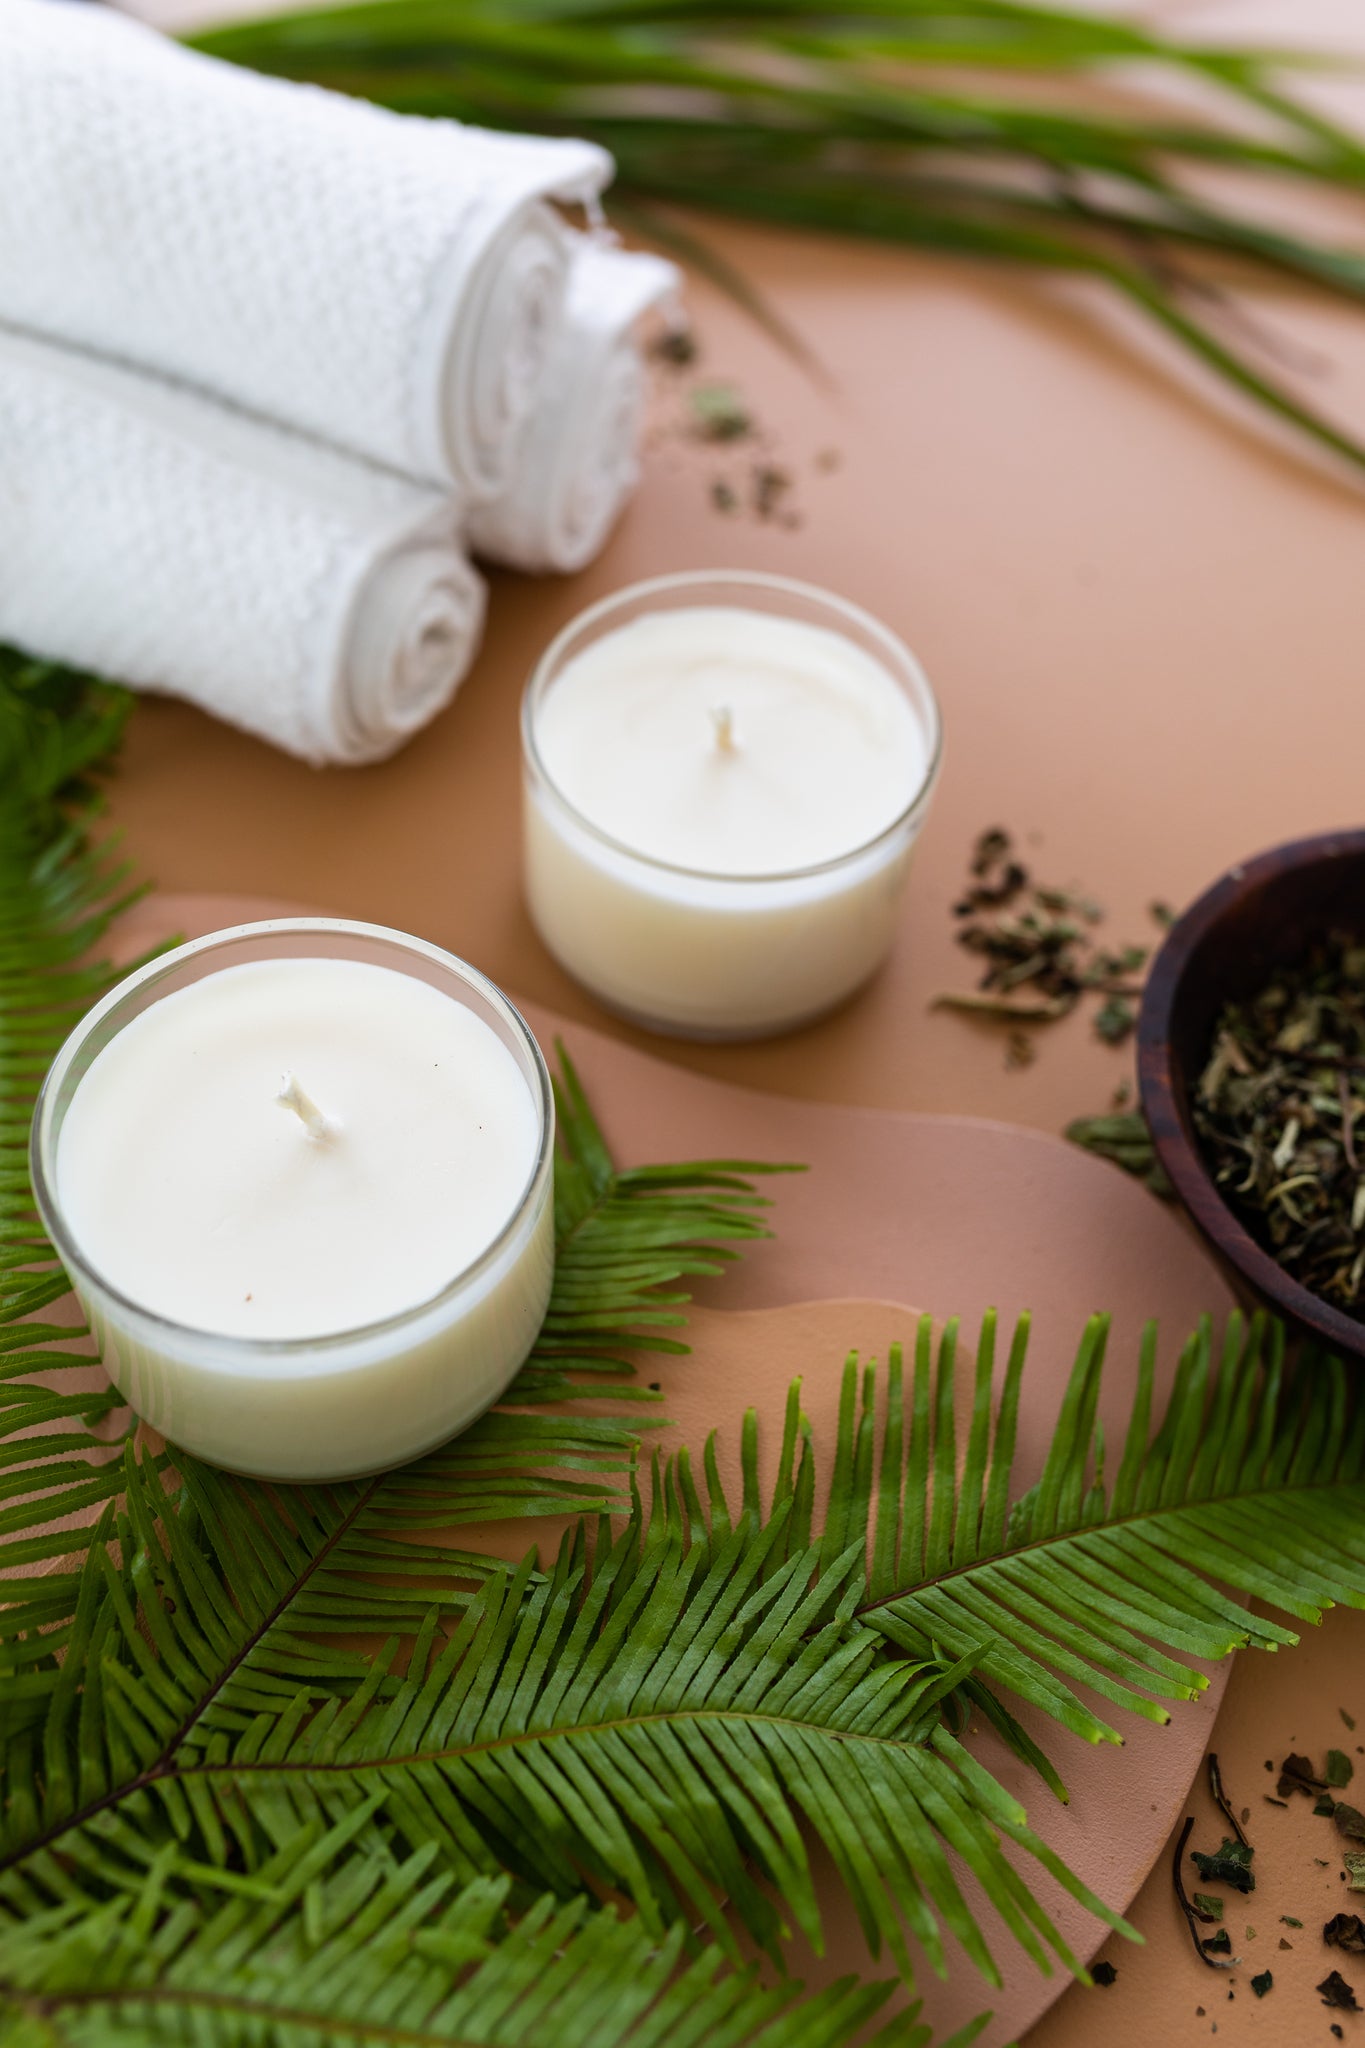 One of Standard Wax’s best selling candle fragrance is White Tea and Thyme. Fill your home with the scents of lemongrass, fern, white tea and freshly picked garden herbs. This fragrance instantly transports you to a stress-free zone and reminds us of some of our favorite spa treatments.